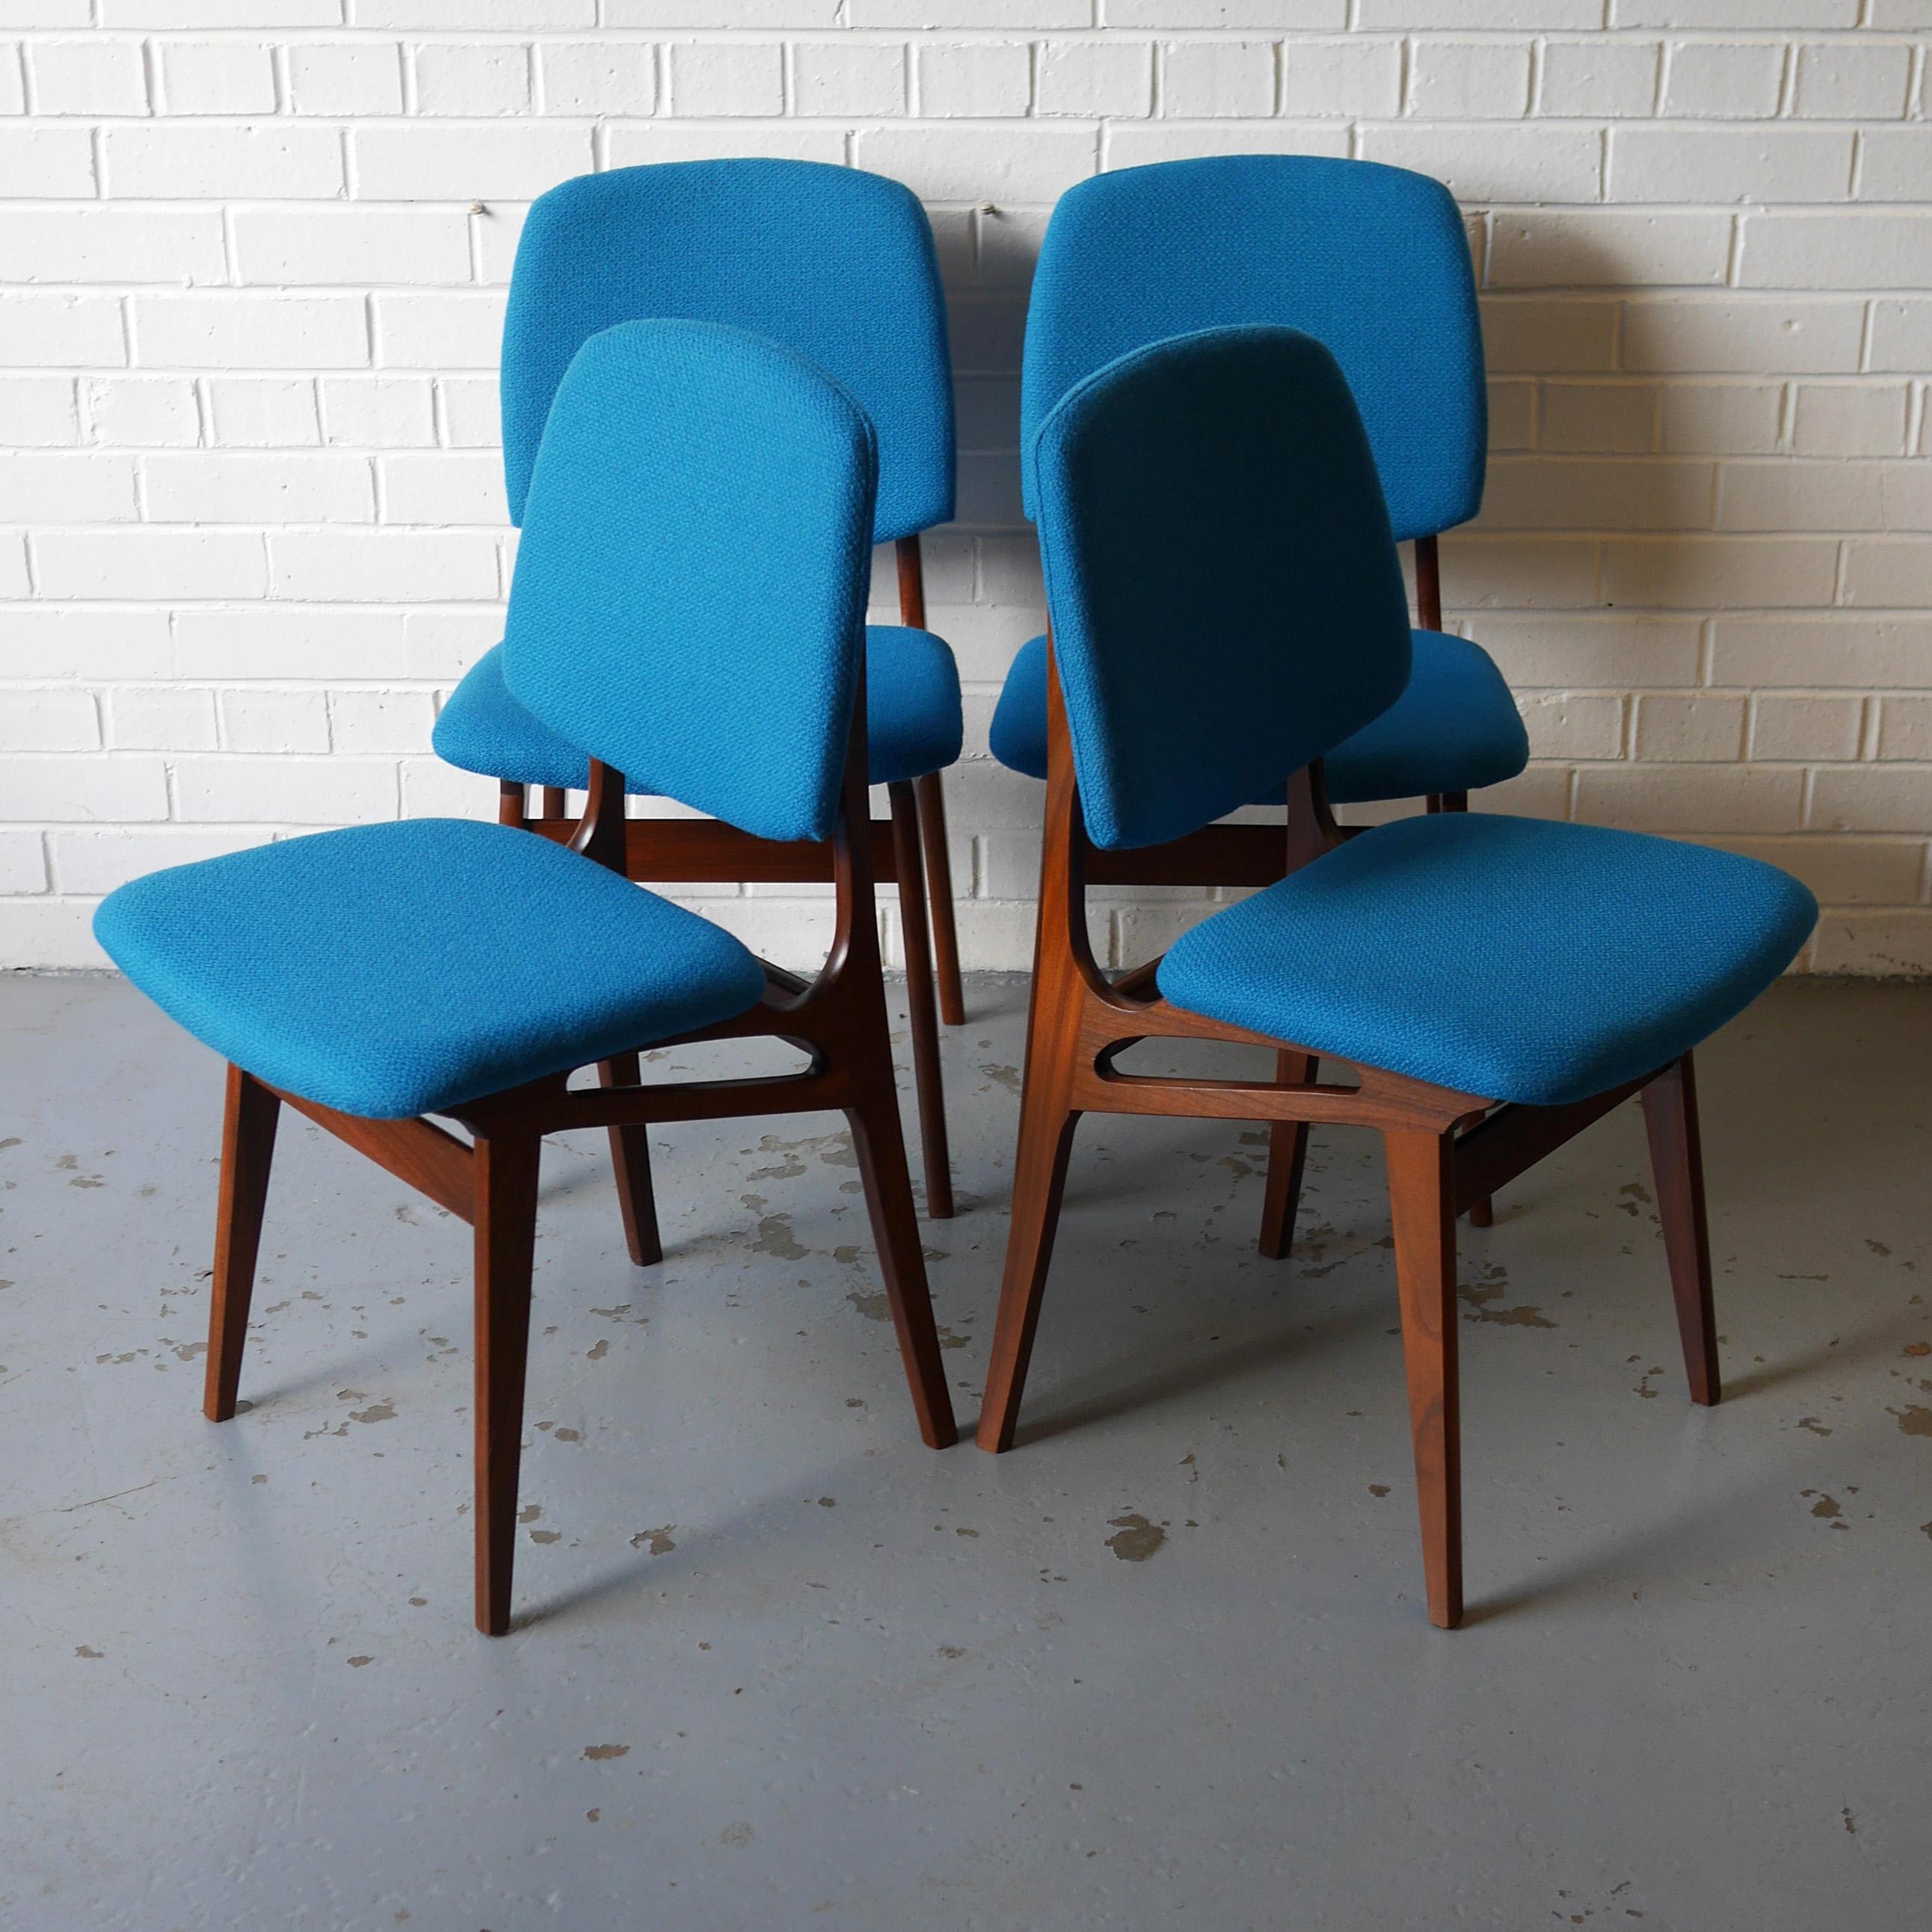 A fully restored and striking set of scarcely seen dining chairs designed by Arnt Sorheim for Brodrene Sorheim of Norway, sourced from the family of the original owner, purchased in Leeds, England in 1961. Wonderful sculptural solid afrormosia